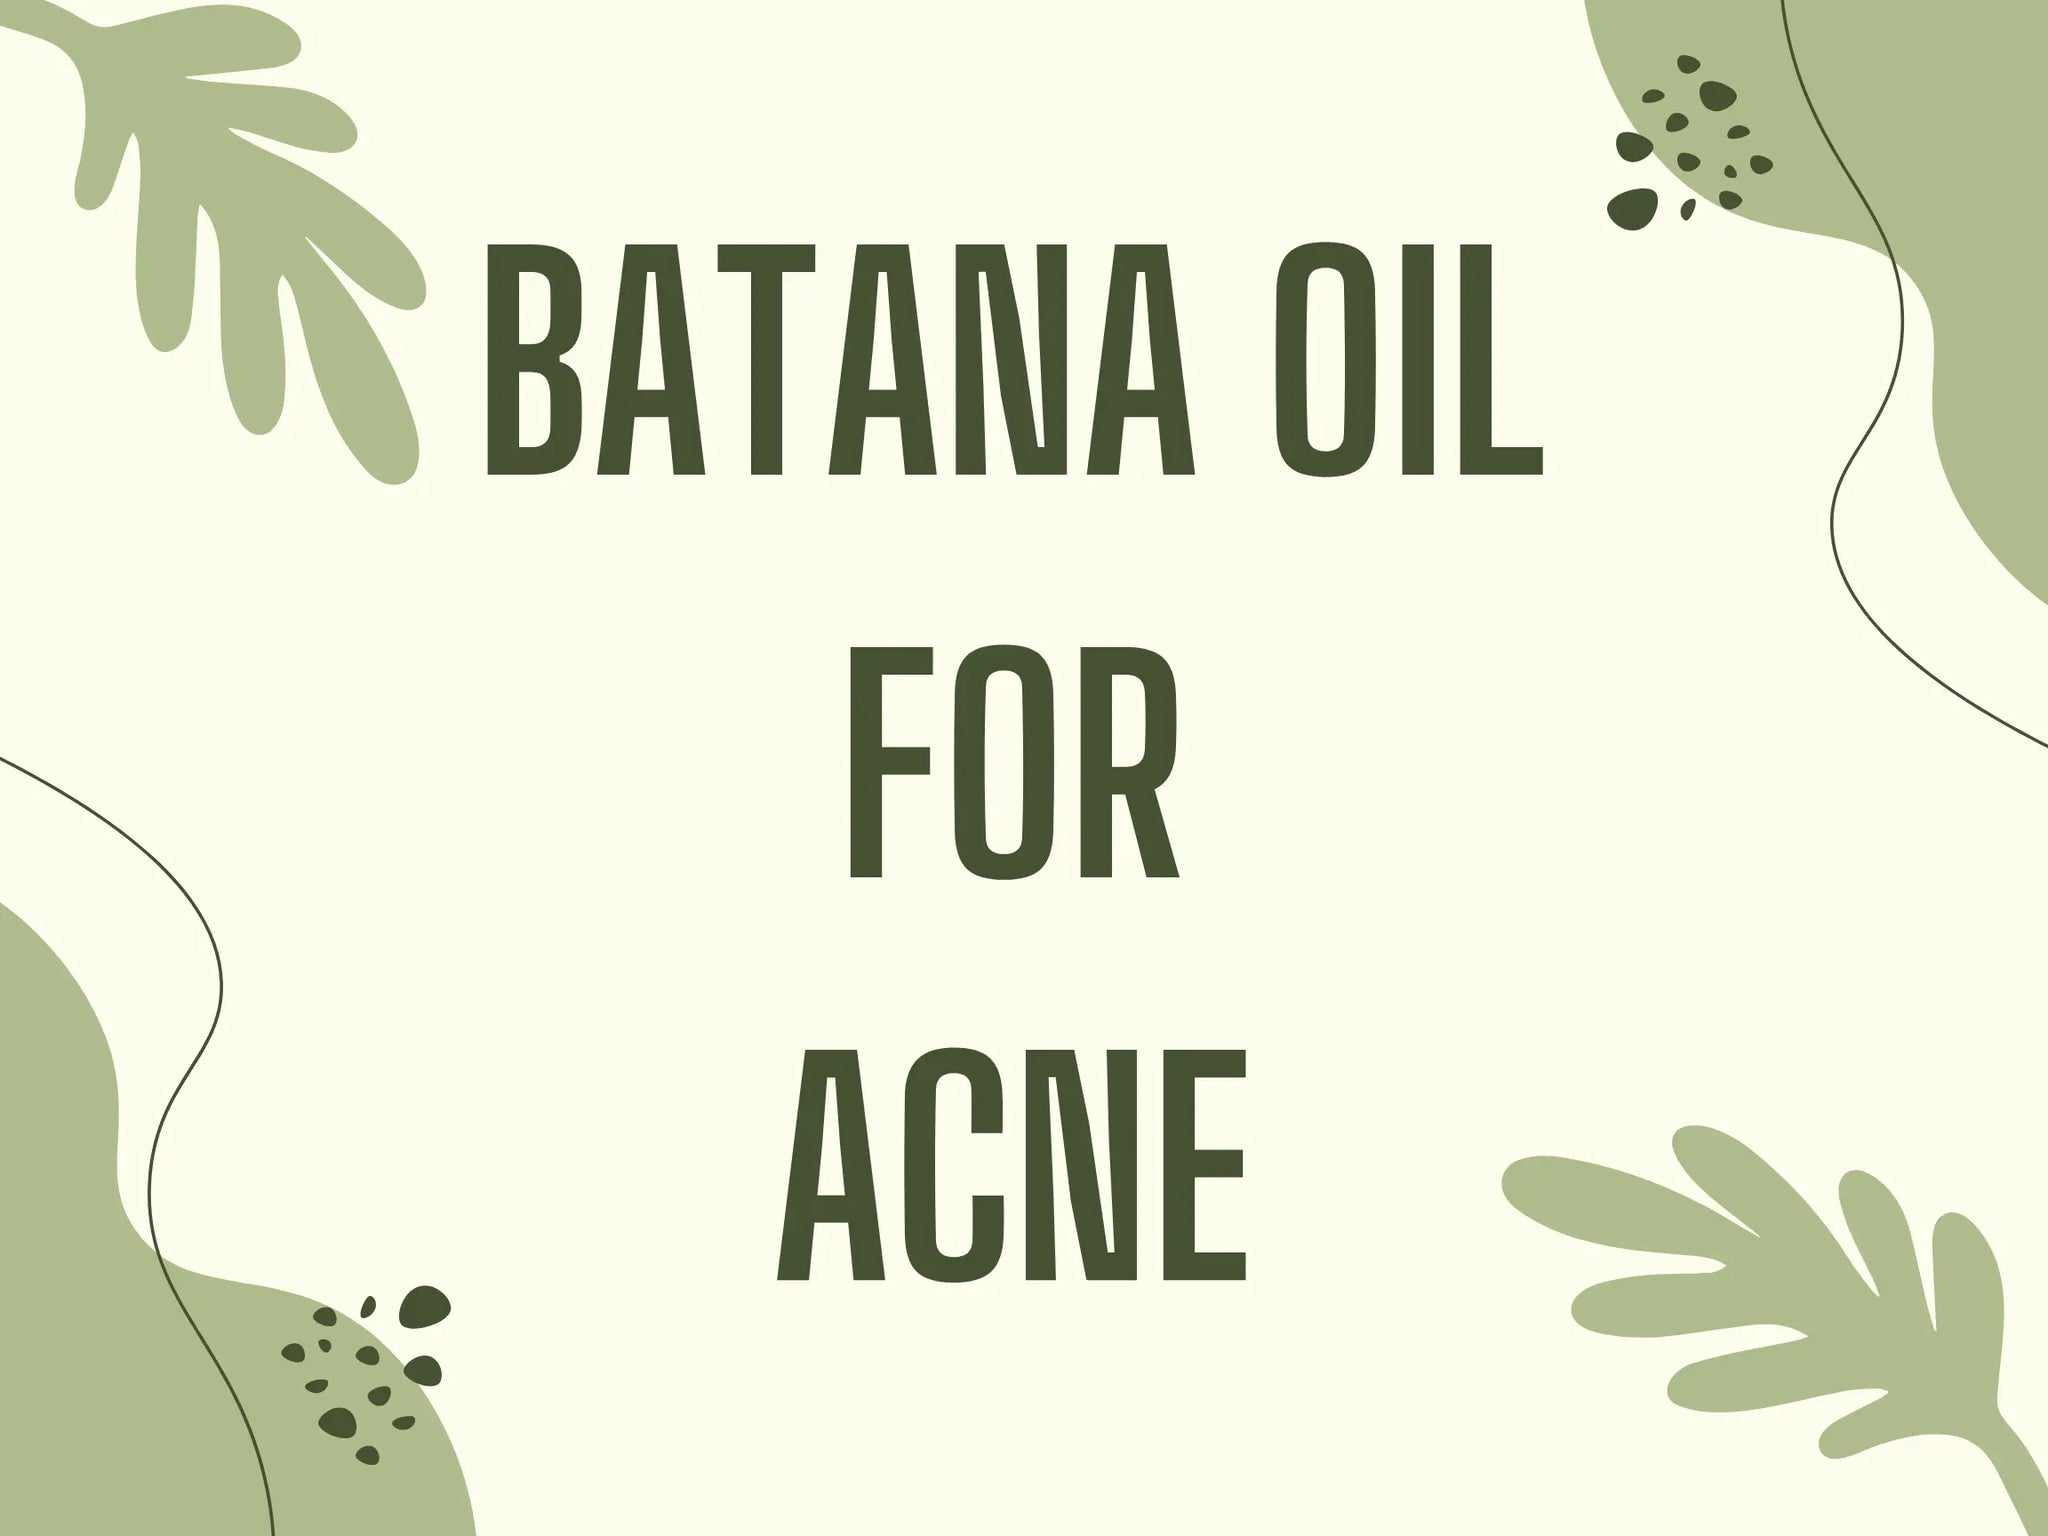 Batana Oil for Acne: Myths, Facts, and How to Use It"